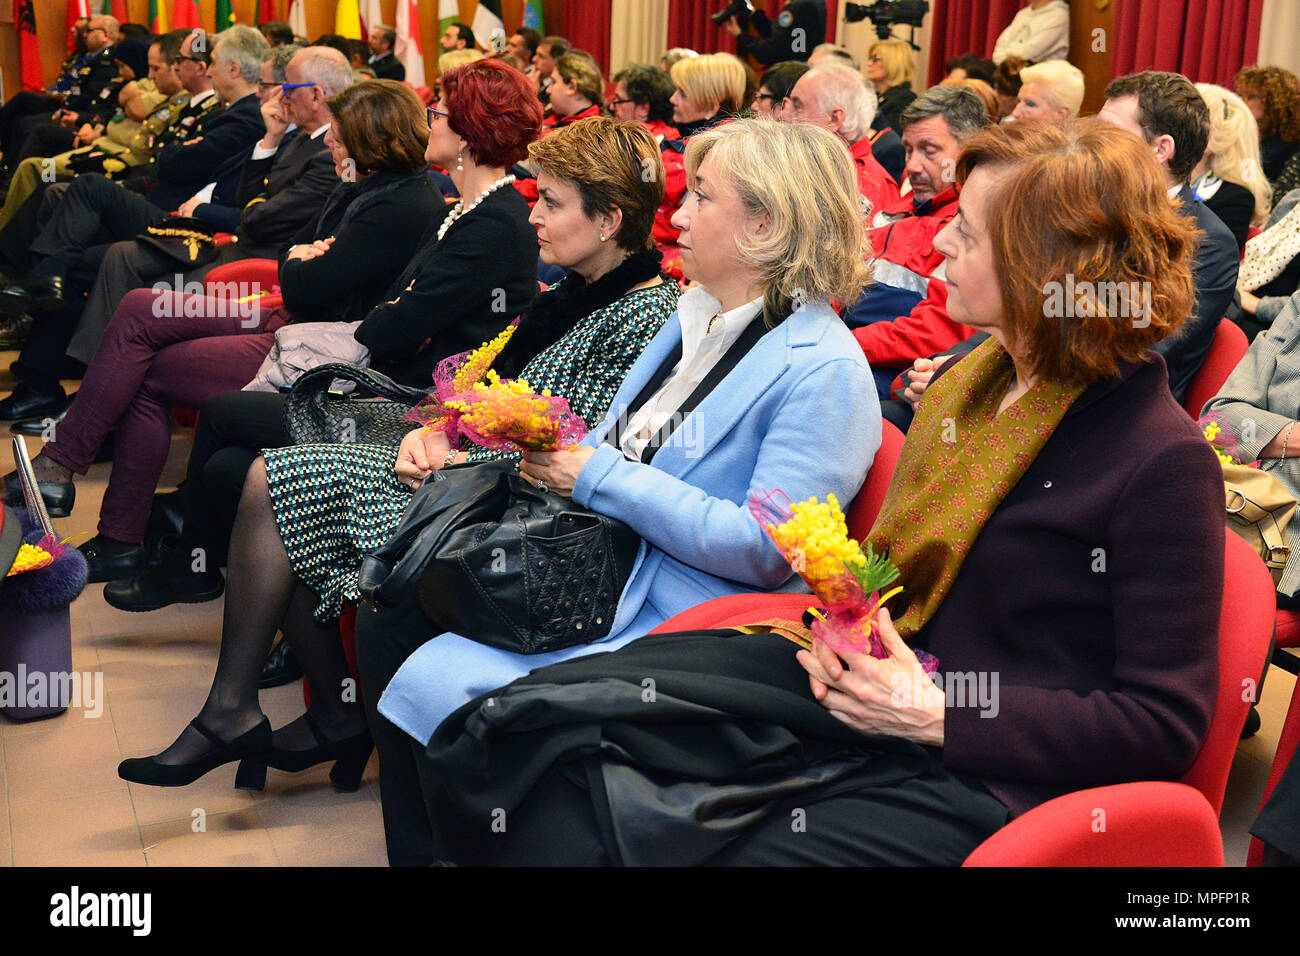 Italian female guests participate in the opening ceremony of the 5th “Gender Protection in Peace Operations” Course at the  Center of Excellence for Stability Police Units (CoESPU) in Vicenza, Italy, Mar. 8, 2017. The event brought together military and civic leaders of the local community and offered the opportunity to celebrate International Women's Day. (U.S. Army Photo by Visual Information Specialist Paolo Bovo/released) Stock Photo